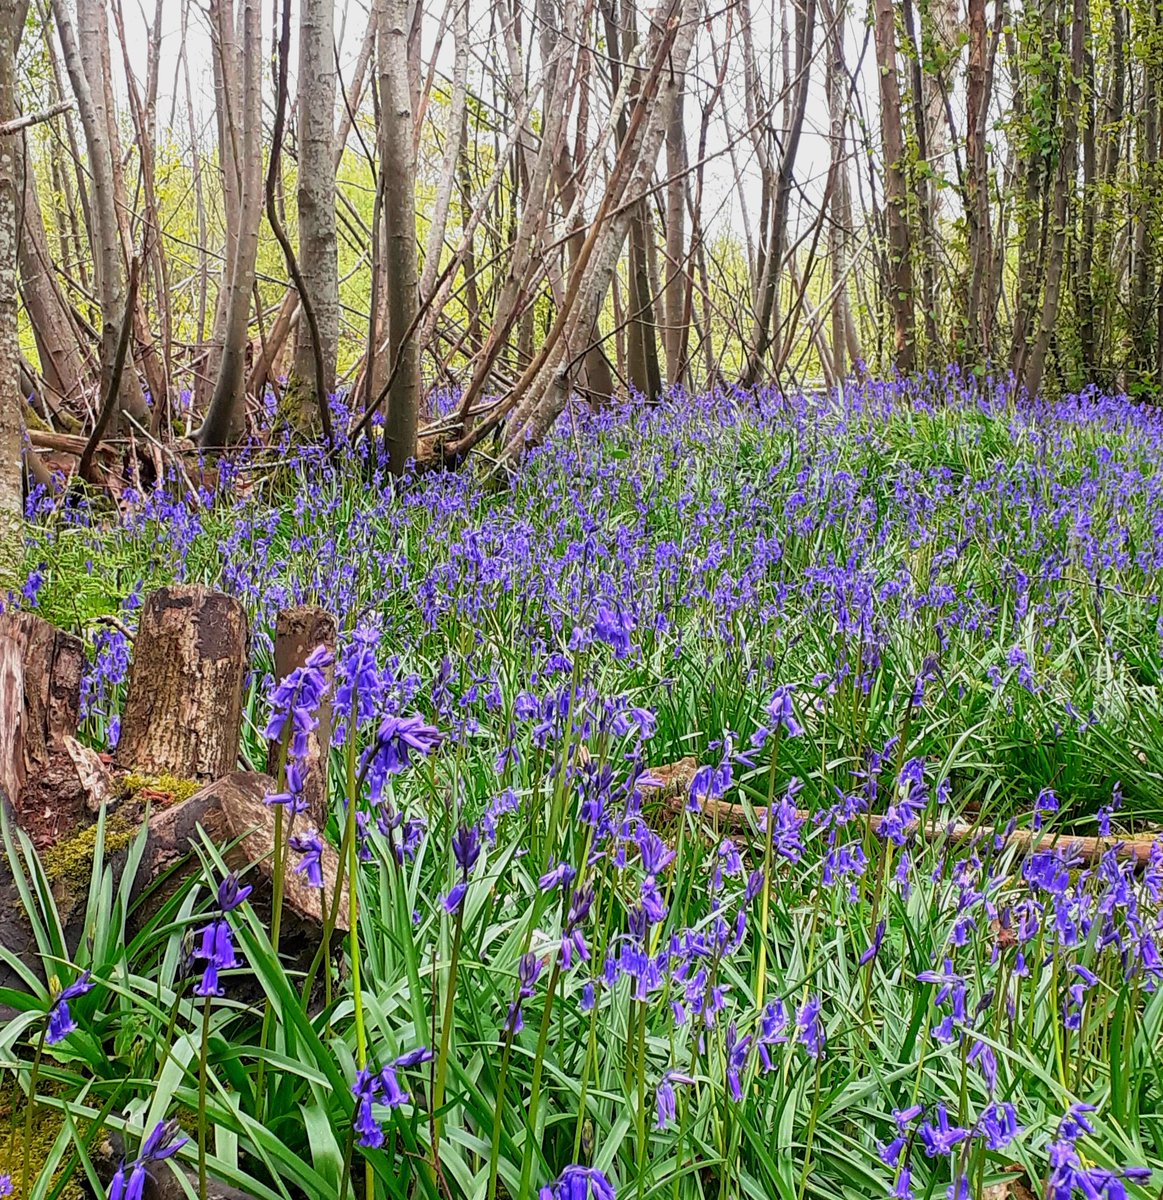 It's mid-April, so I am contractually obliged to show a snap of the local bluebell wood. 💙 @SussexWildlife